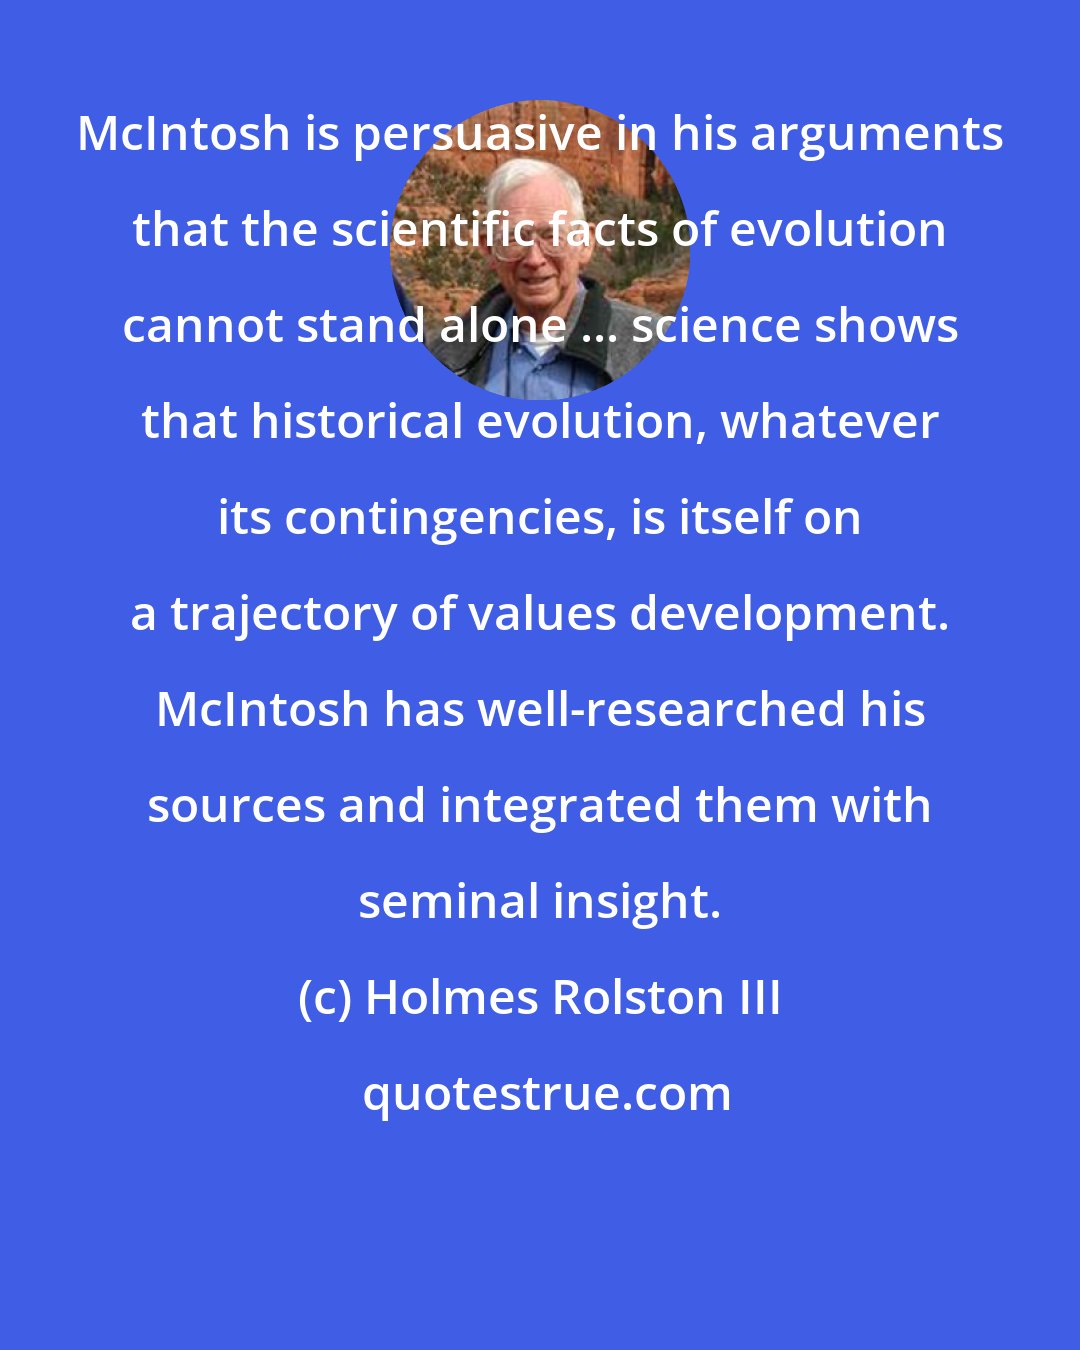 Holmes Rolston III: McIntosh is persuasive in his arguments that the scientific facts of evolution cannot stand alone ... science shows that historical evolution, whatever its contingencies, is itself on a trajectory of values development. McIntosh has well-researched his sources and integrated them with seminal insight.